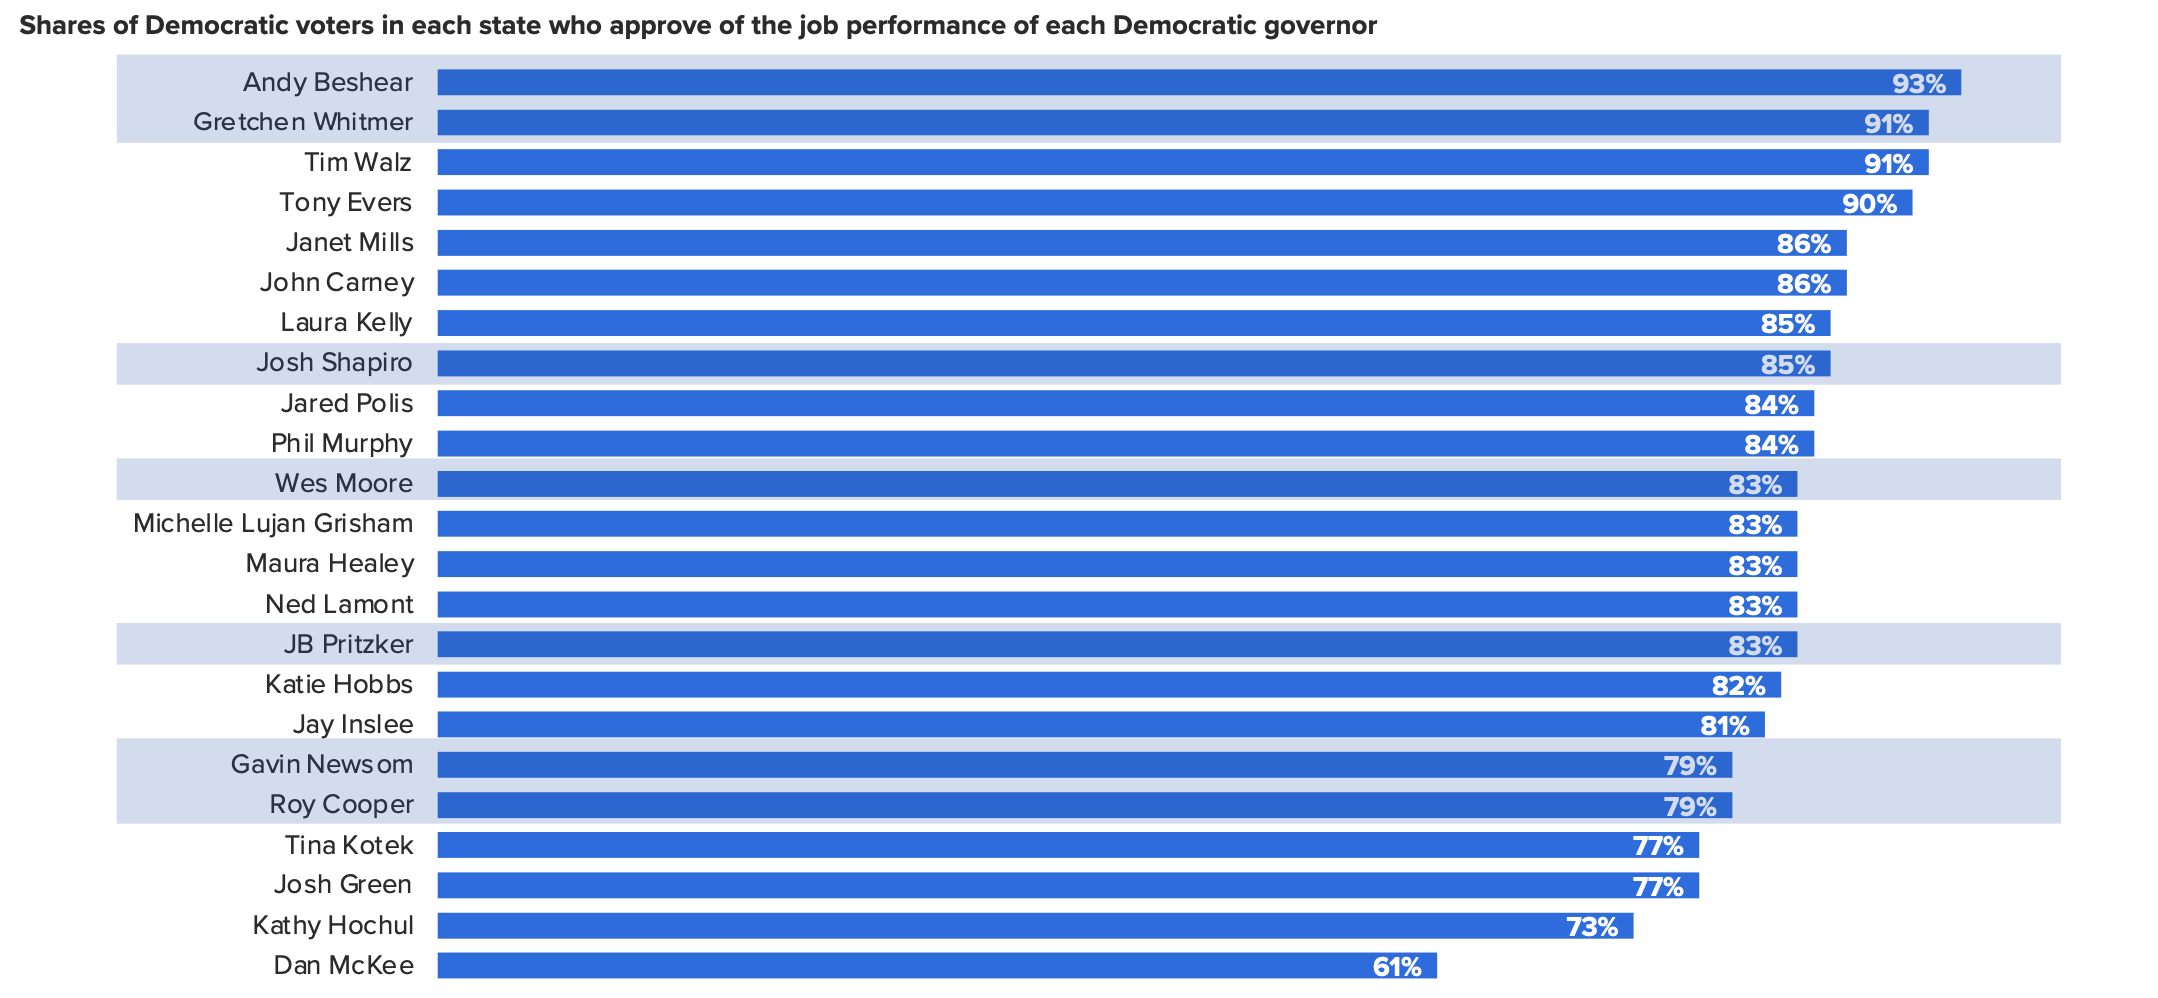 Beshear moves up in national governor approval ratings